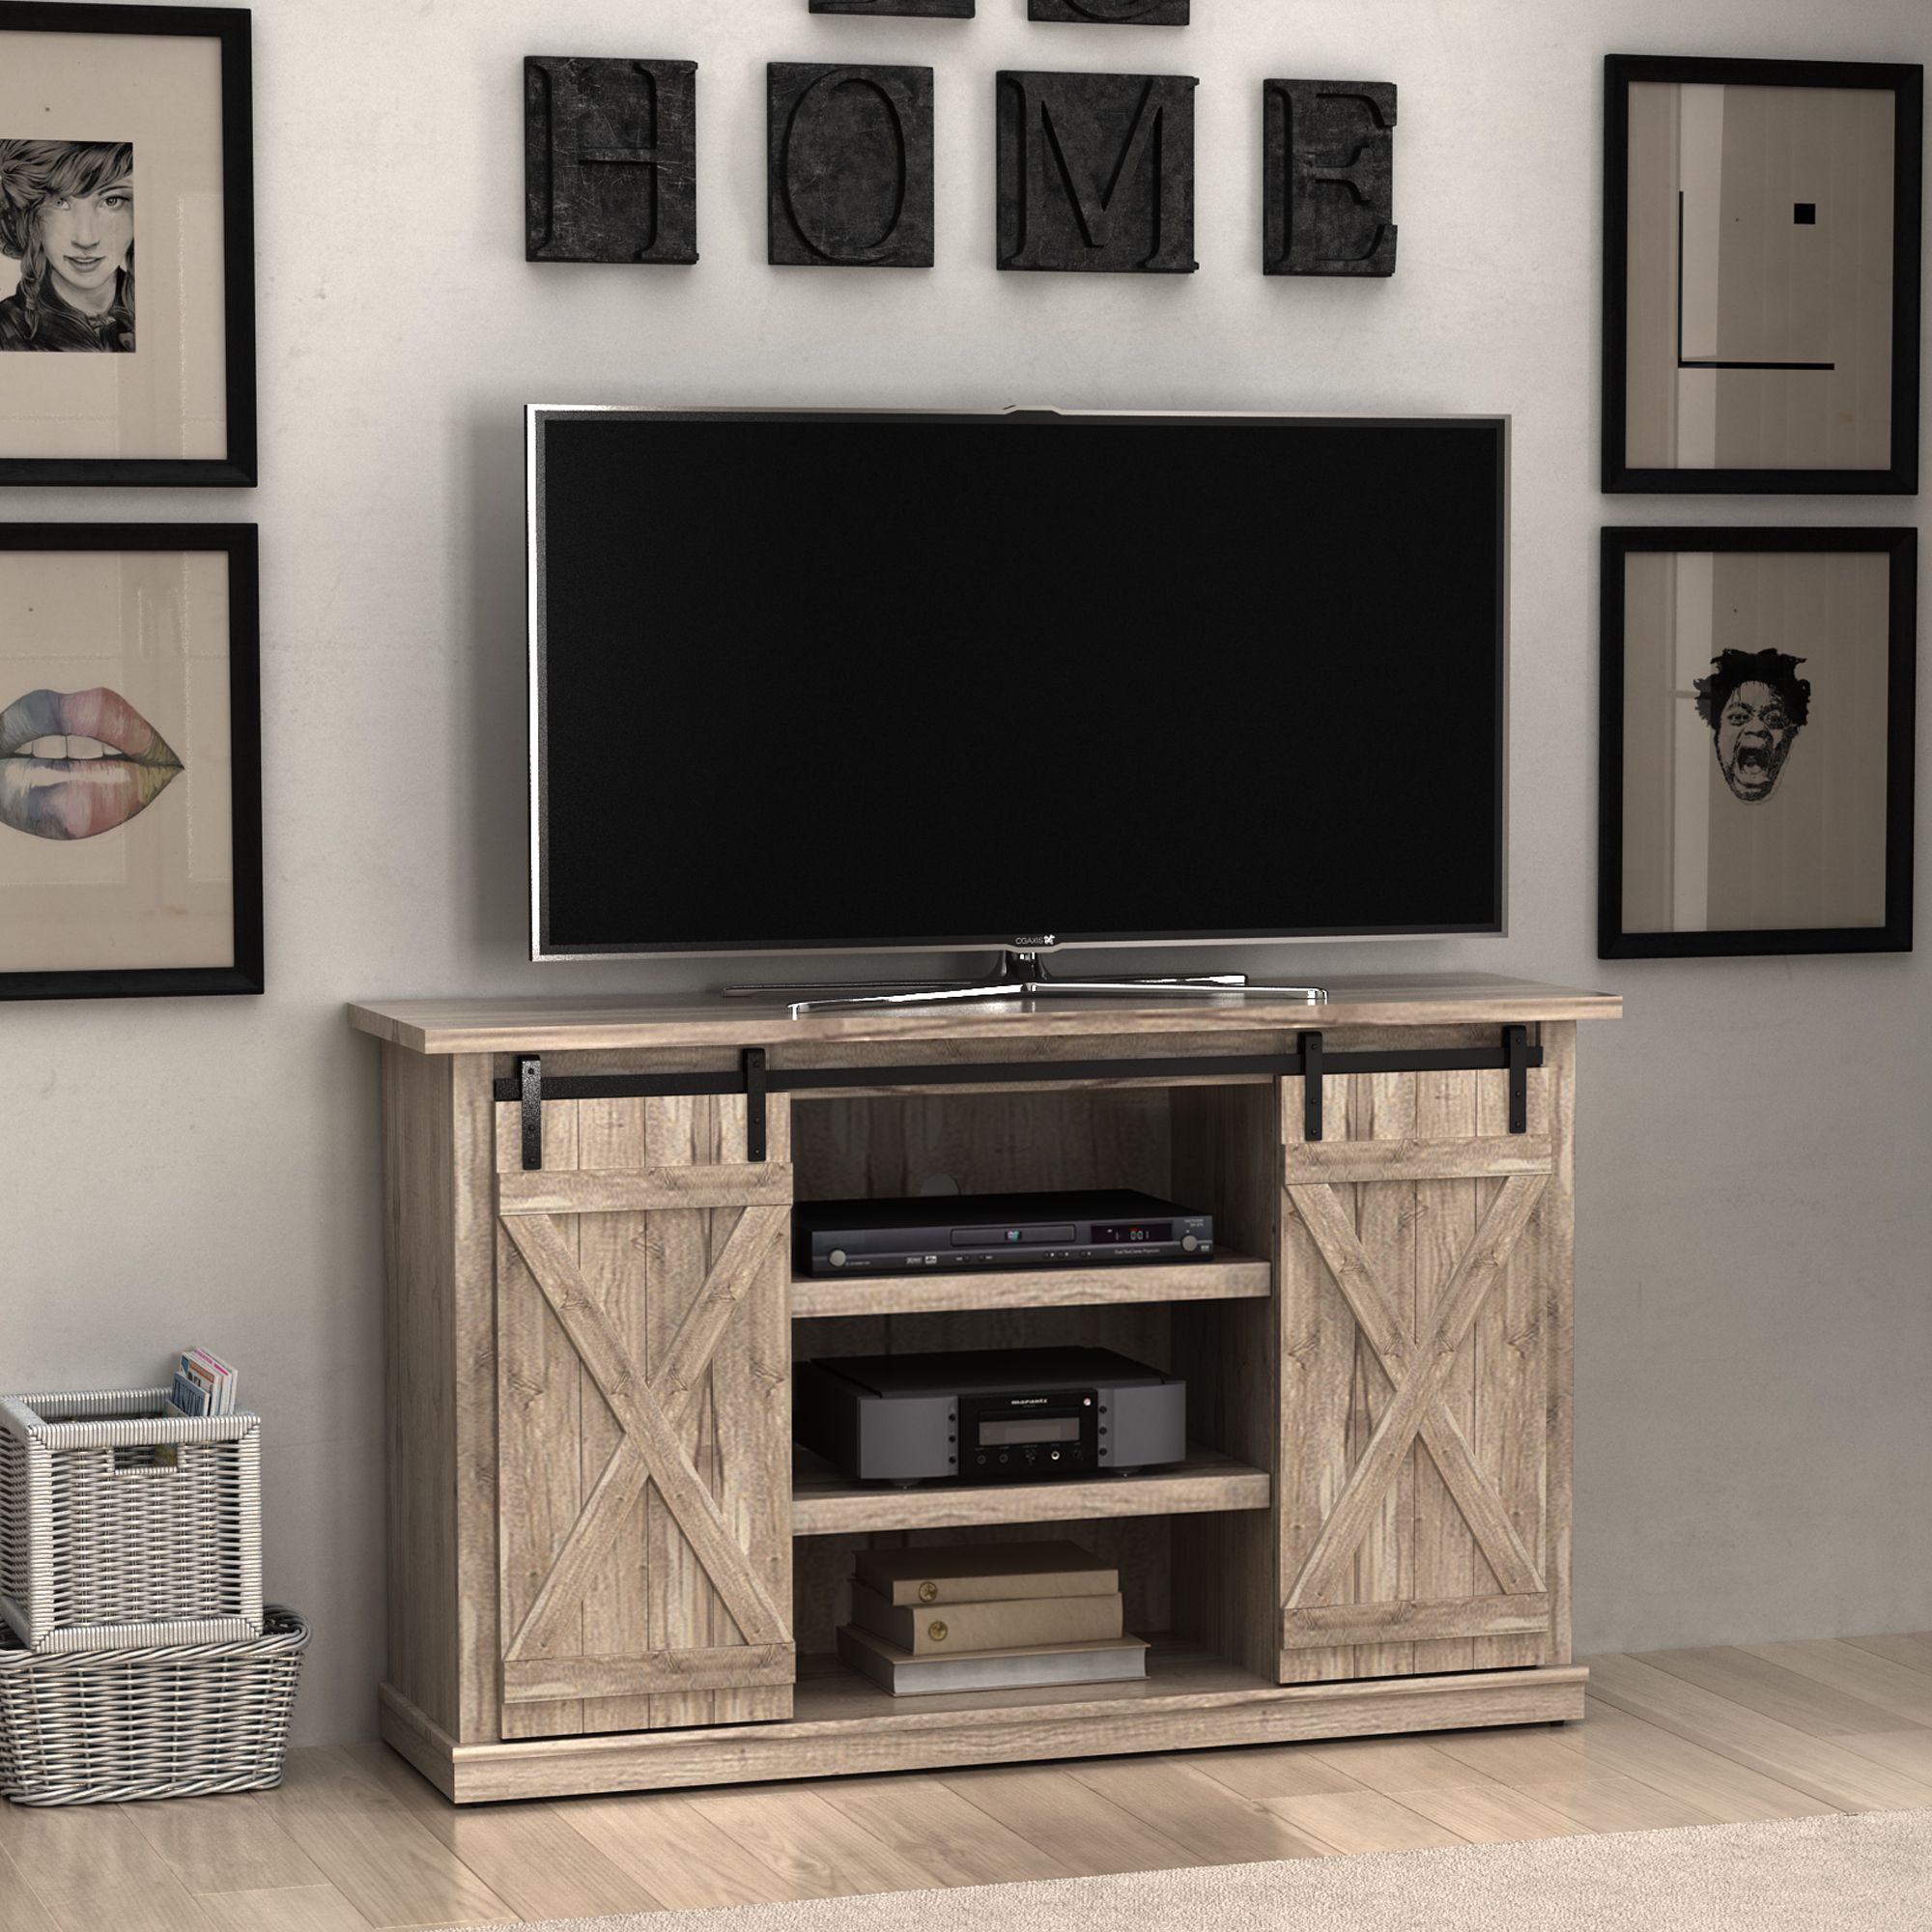 Cottonwood Tv Stand For Tvs Up To 60 Inches With Sliding With Whittier Tv Stands For Tvs Up To 60" (View 12 of 15)